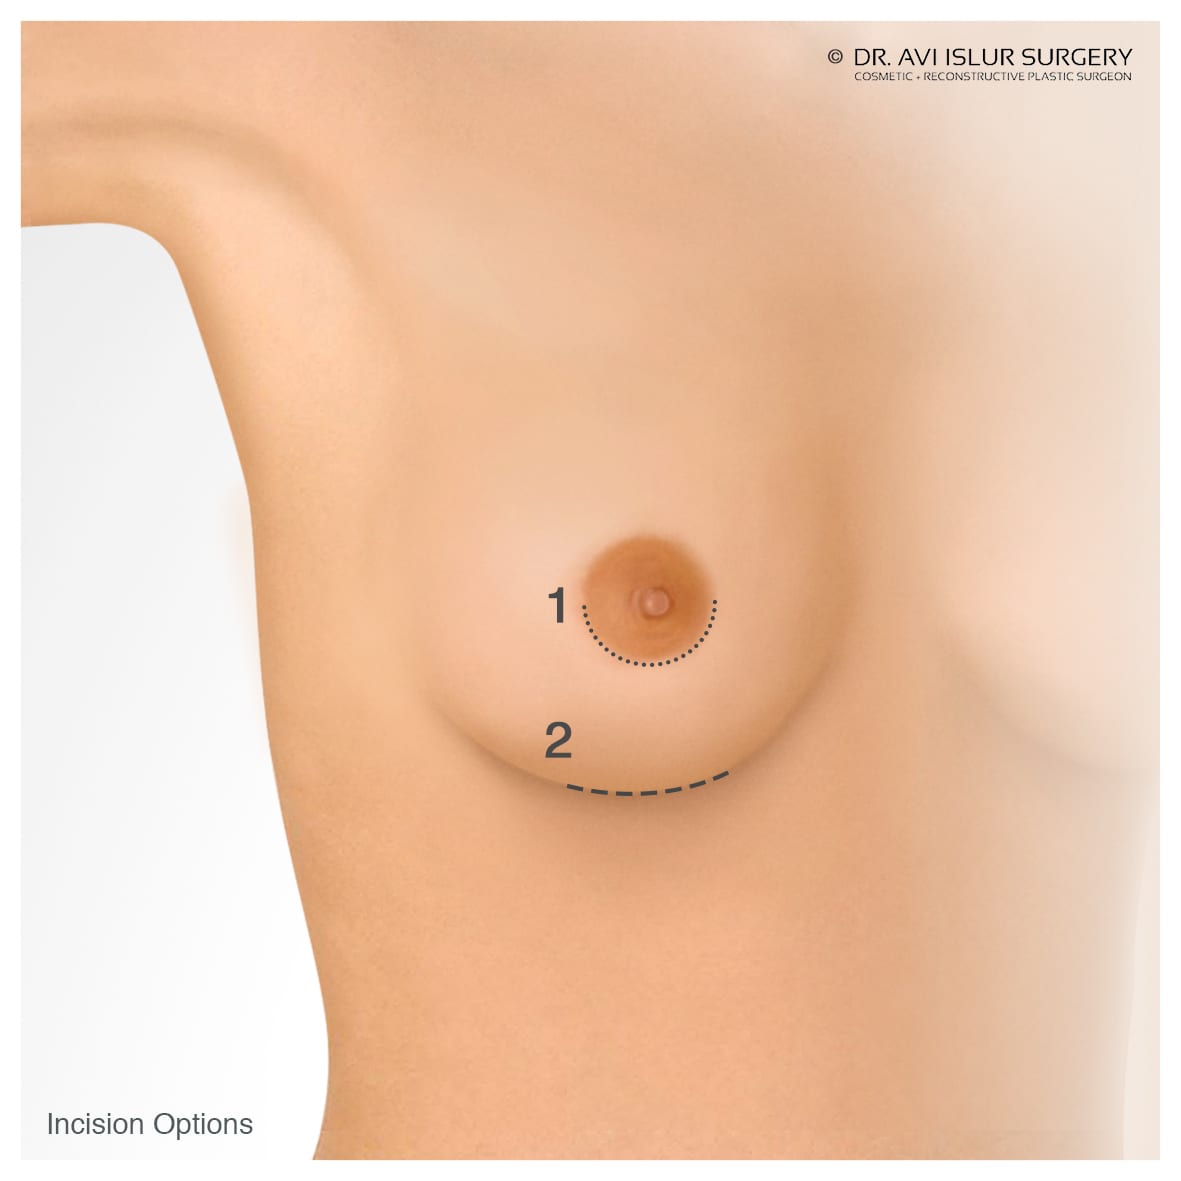 Illustration of Incision options for Breast Implants Dr. Avi Islur Winnipeg, Manitoba, Canada The First Glance